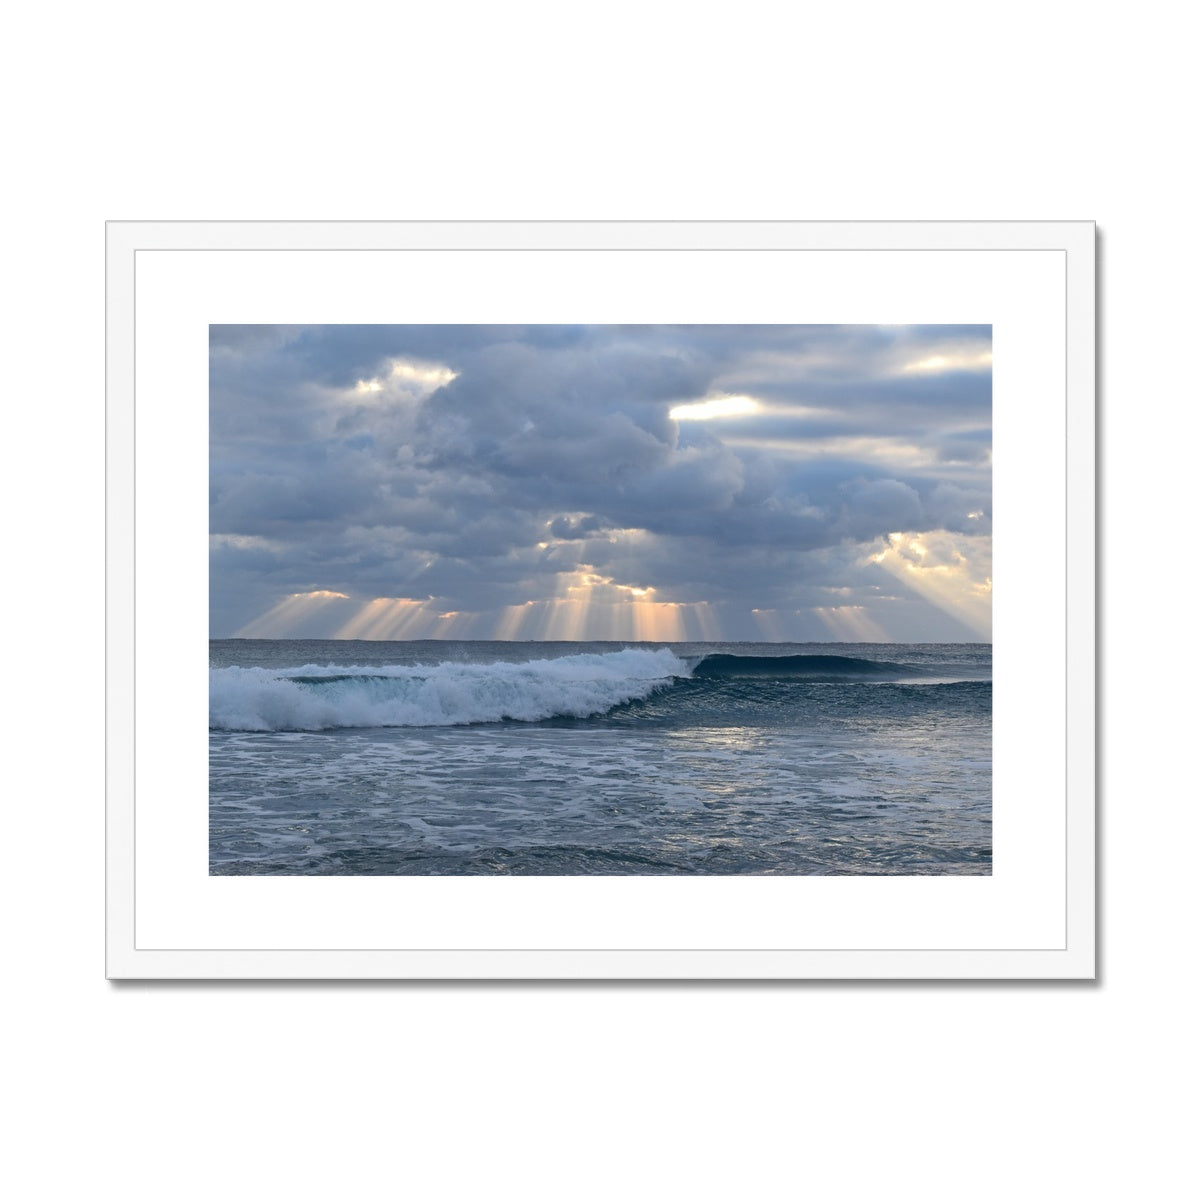 Clouds waves rays matted & framed print Home decor by Jacqueline mb Designs 